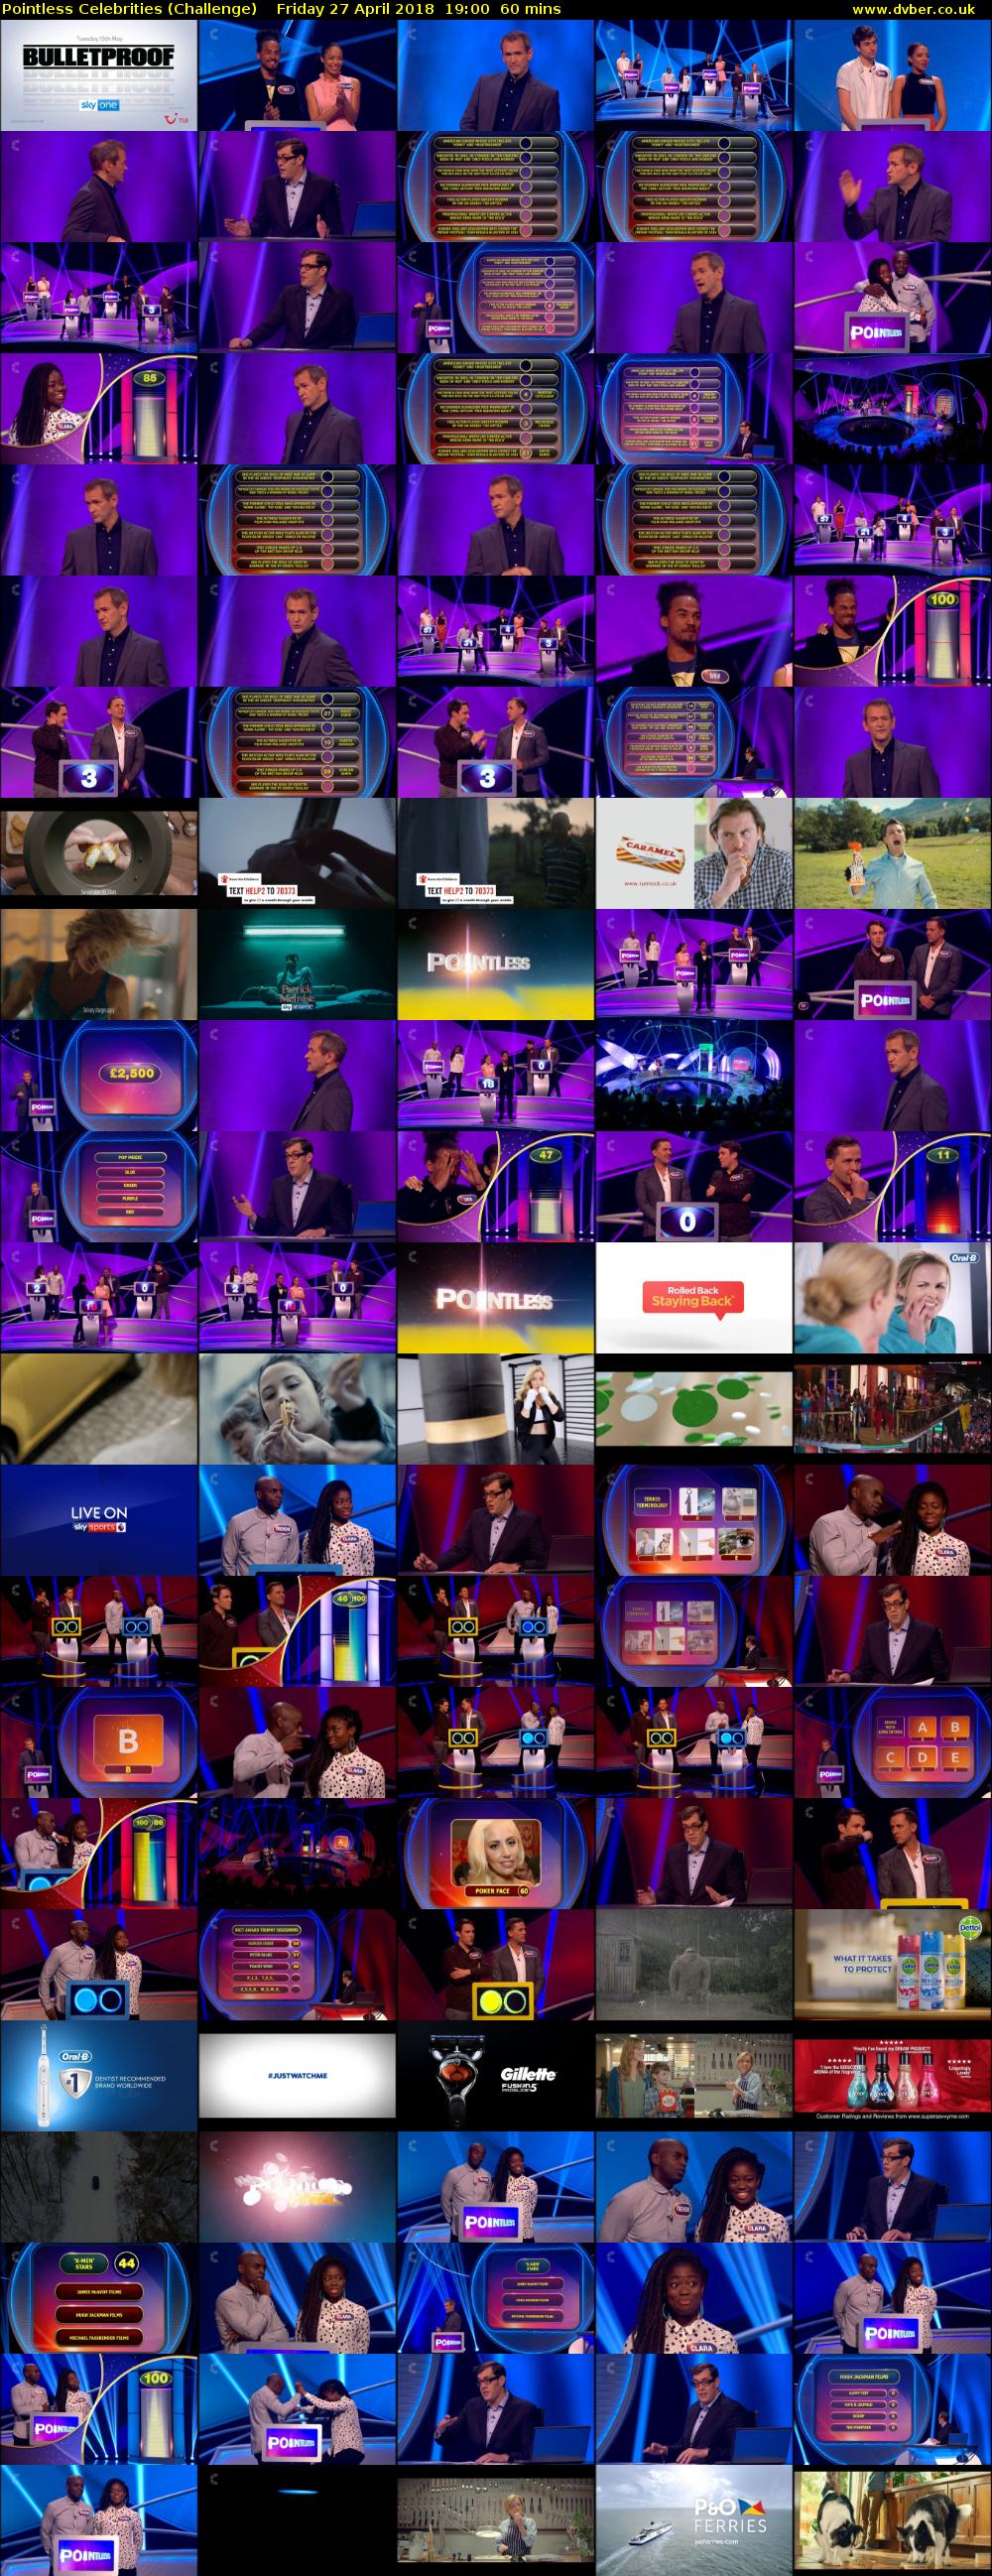 Pointless Celebrities (Challenge) Friday 27 April 2018 19:00 - 20:00